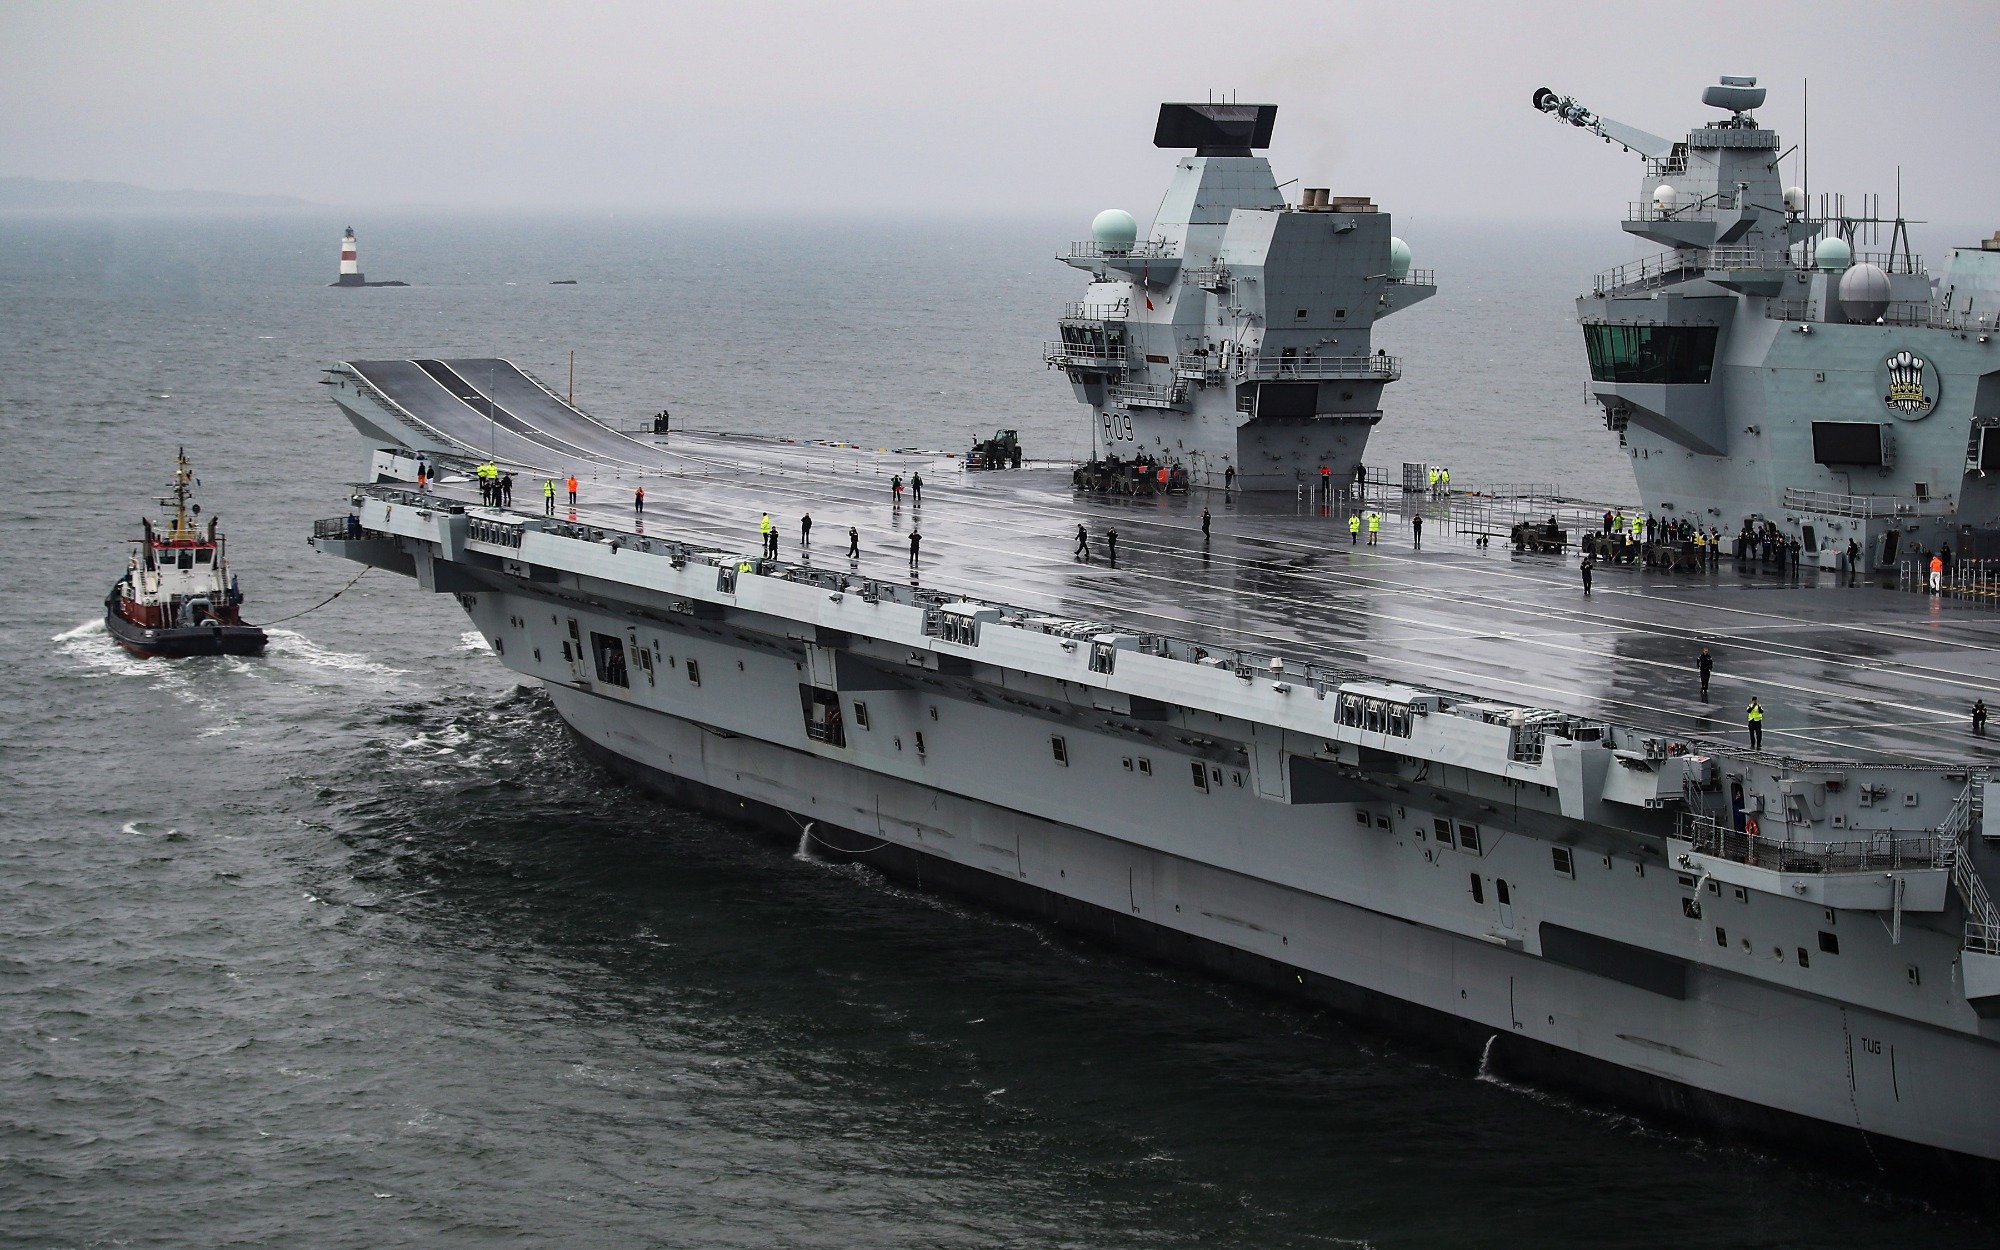 HMS Prince of Wales Aircraft Carrier